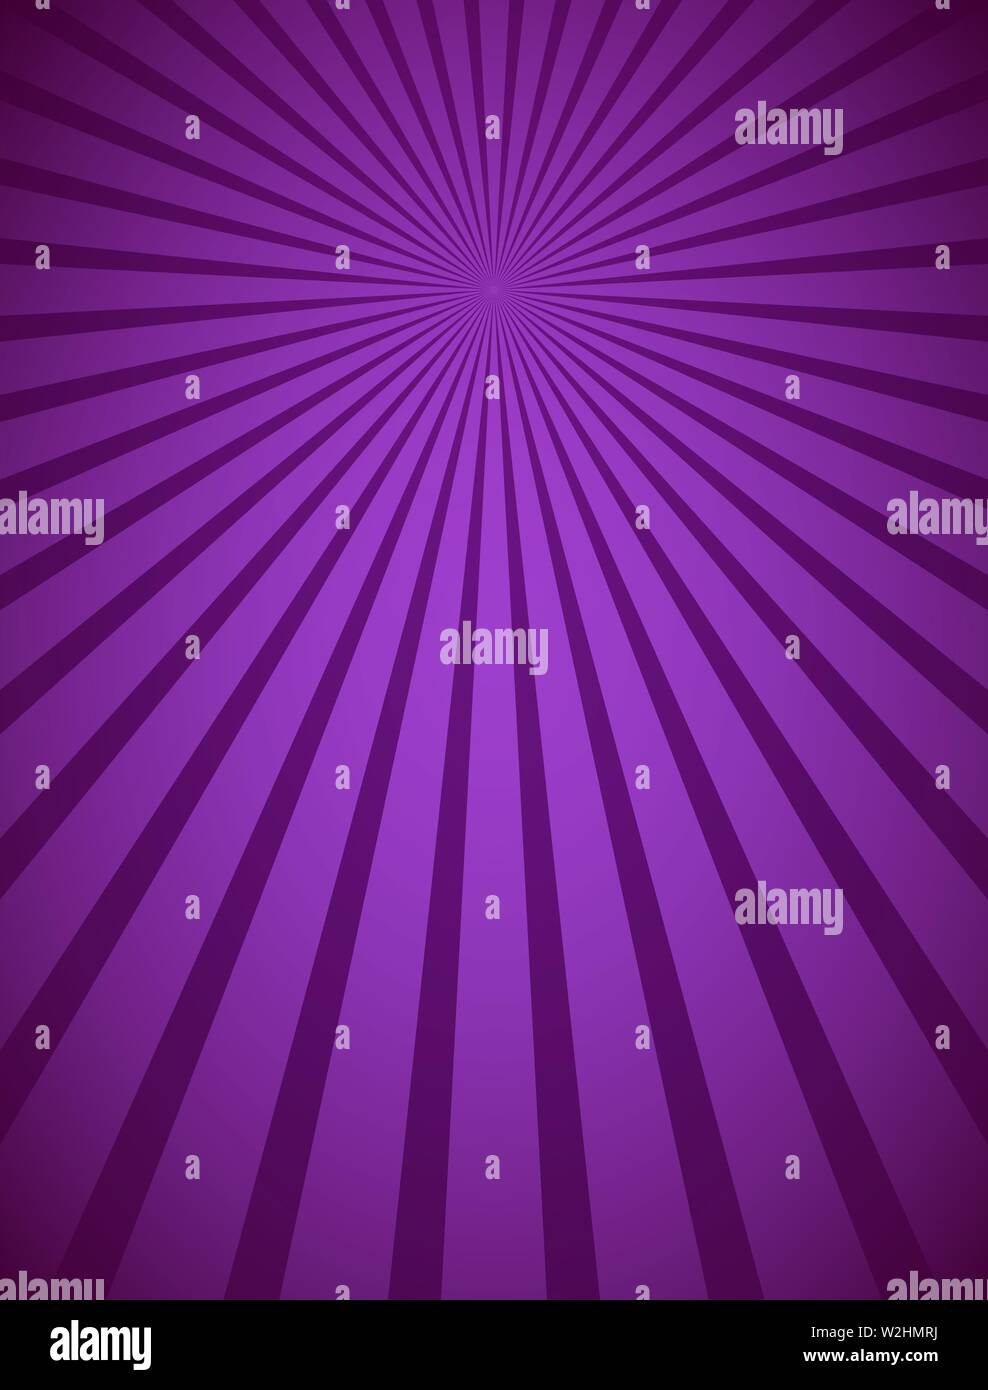 Purple beams and rays abstract vector illustration radial lines background Stock Vector